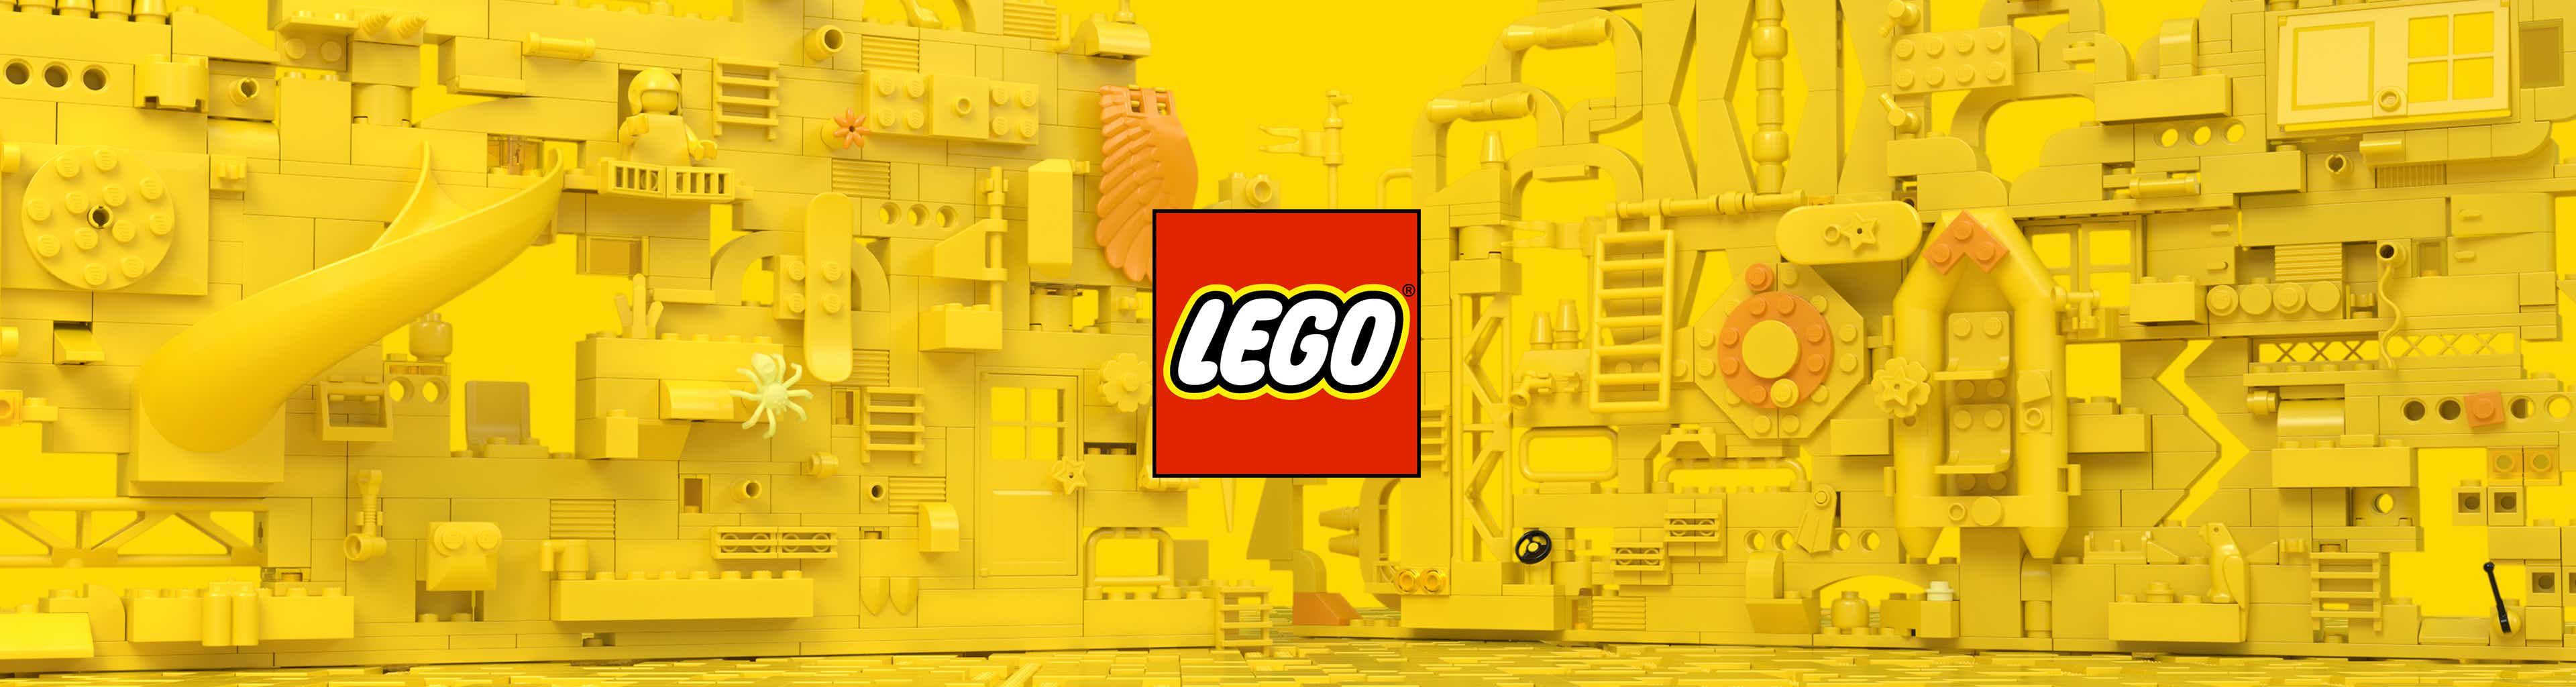 The LEGO® Brand - LEGO Group - About us - LEGO.com US